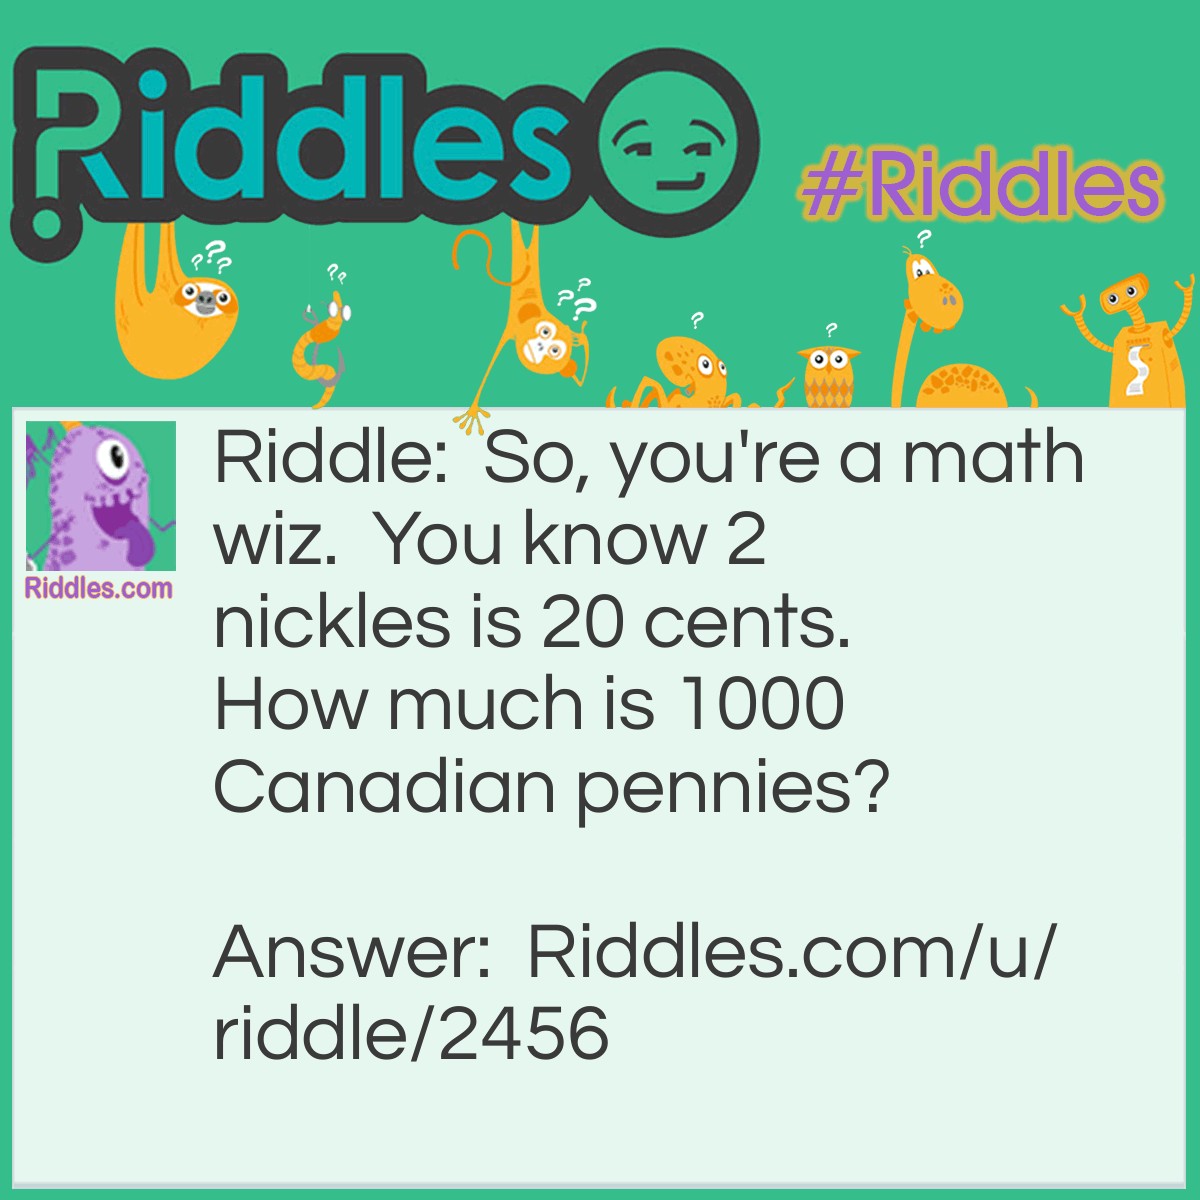 Riddle: So, you're a math wiz.  You know 2 nickles is 20 cents.  How much is 1000 Canadian pennies? Answer: Nothing, in Canada pennies are worthless.